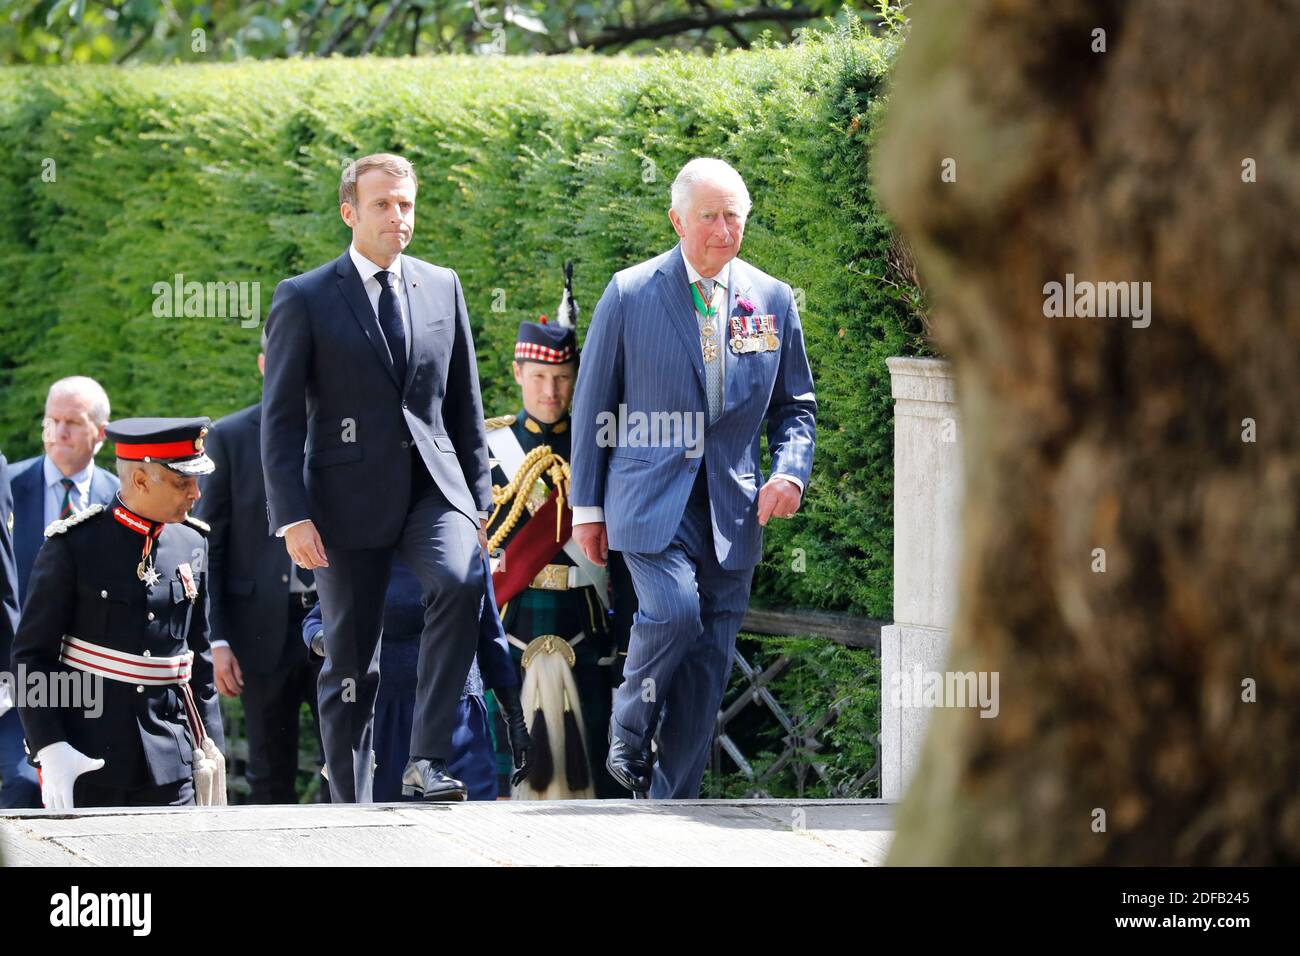 Britain's Prince Charles, Prince of Wales (R) and French President Emmanuel Macron (L) arrive to lay wreaths at the statue of former French president Charles de Gaulle at Carlton Gardens in central London on June 18, 2020 during a visit to mark the anniversary of former de Gaulle's appeal to French people to resist the Nazi occupation. - Macron visited London on June 18 to commemorate the 80th anniversary of former French president Charles de Gaulle's appeal to French people to resist the Nazi occupation during World War II. Photo by Tolga AKMEN/Pool/ABACAPRESS.COM Stock Photo